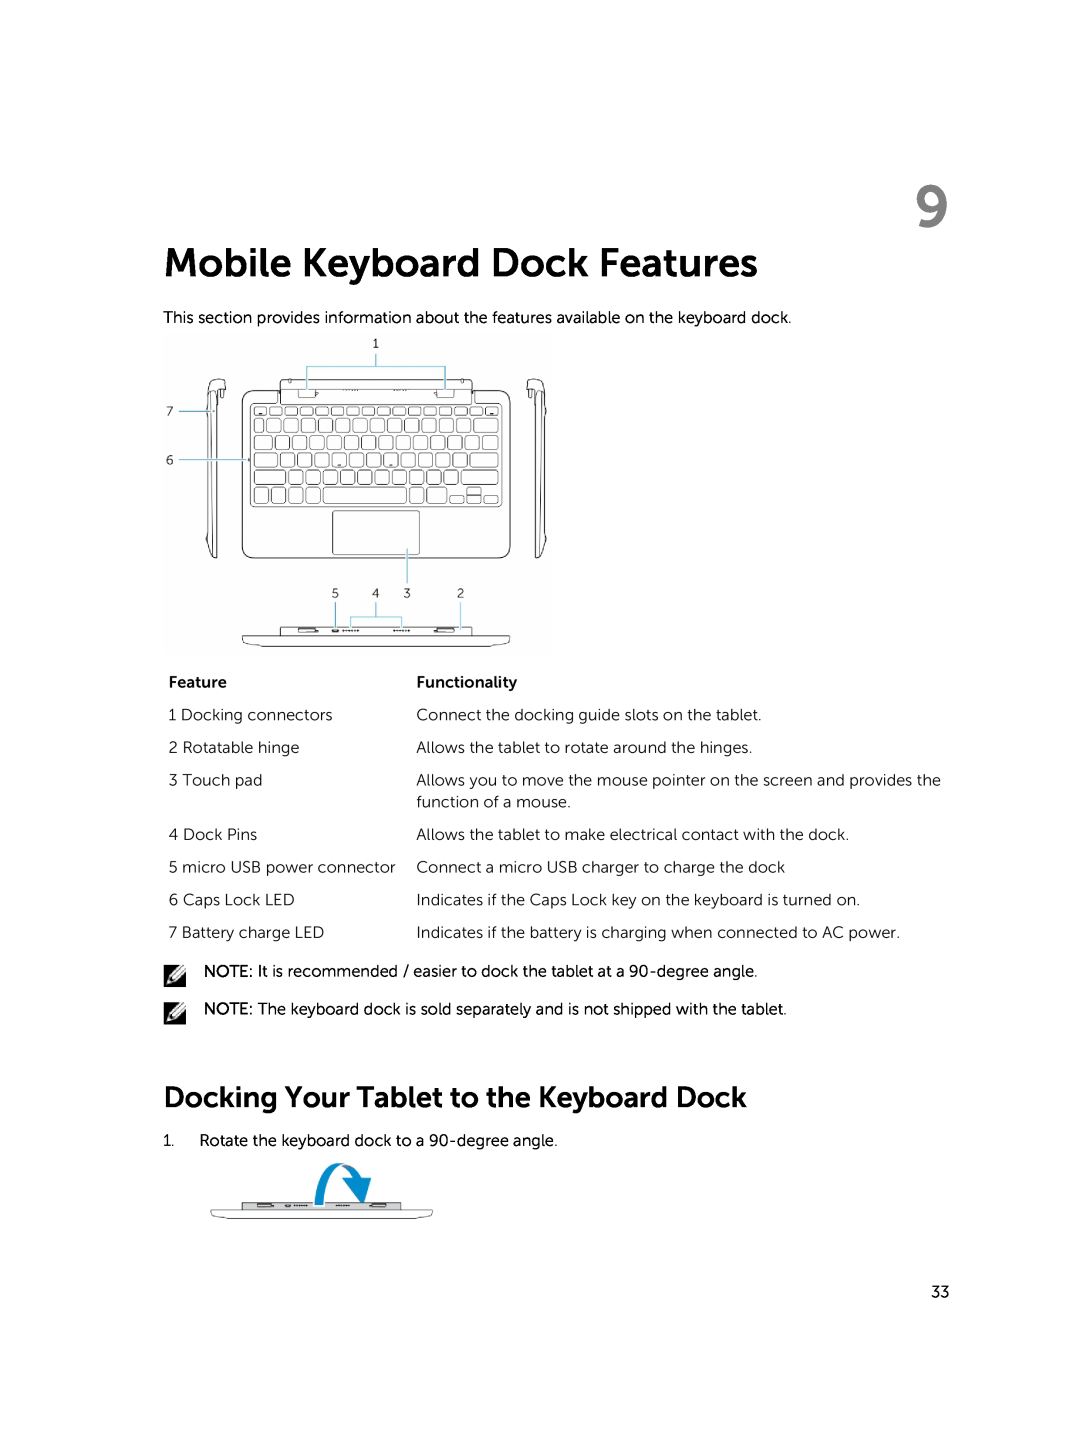 Dell T07G manual Mobile Keyboard Dock Features, Docking Your Tablet to the Keyboard Dock 